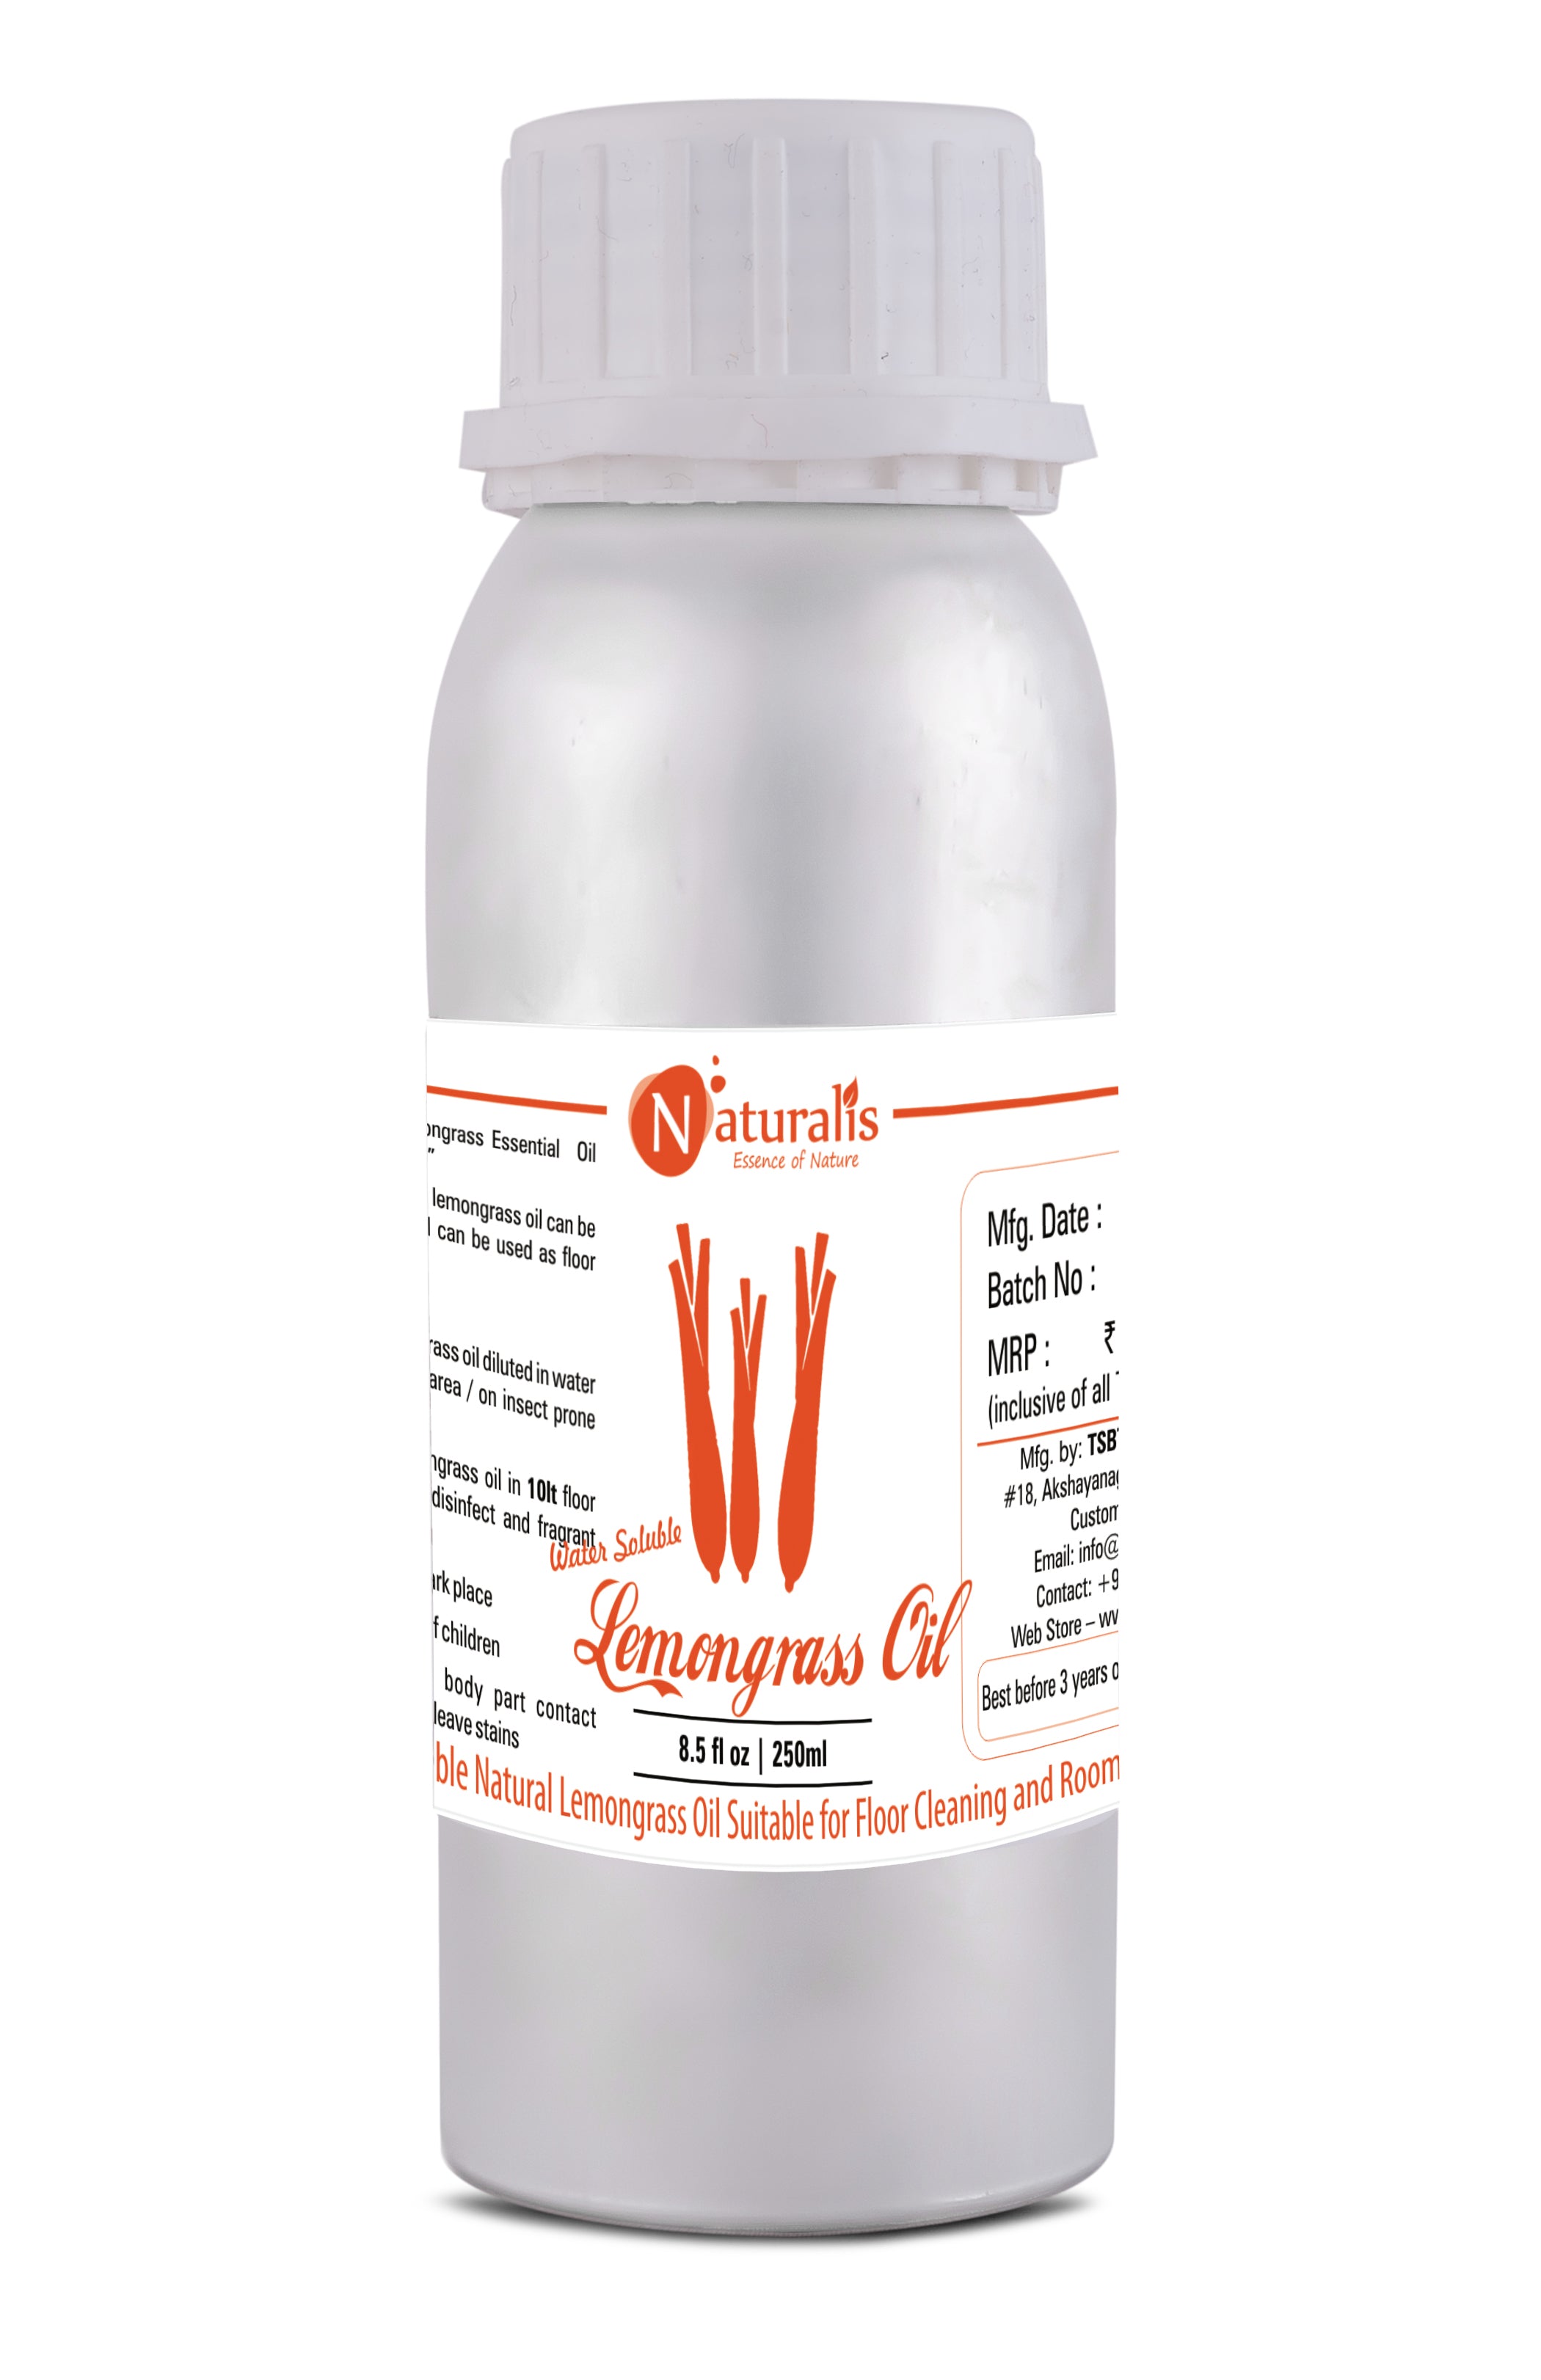 Naturalis Water Soluble Natural Lemongrass Oil Suitable for Floor Cleaning and Room Spray - Naturalis